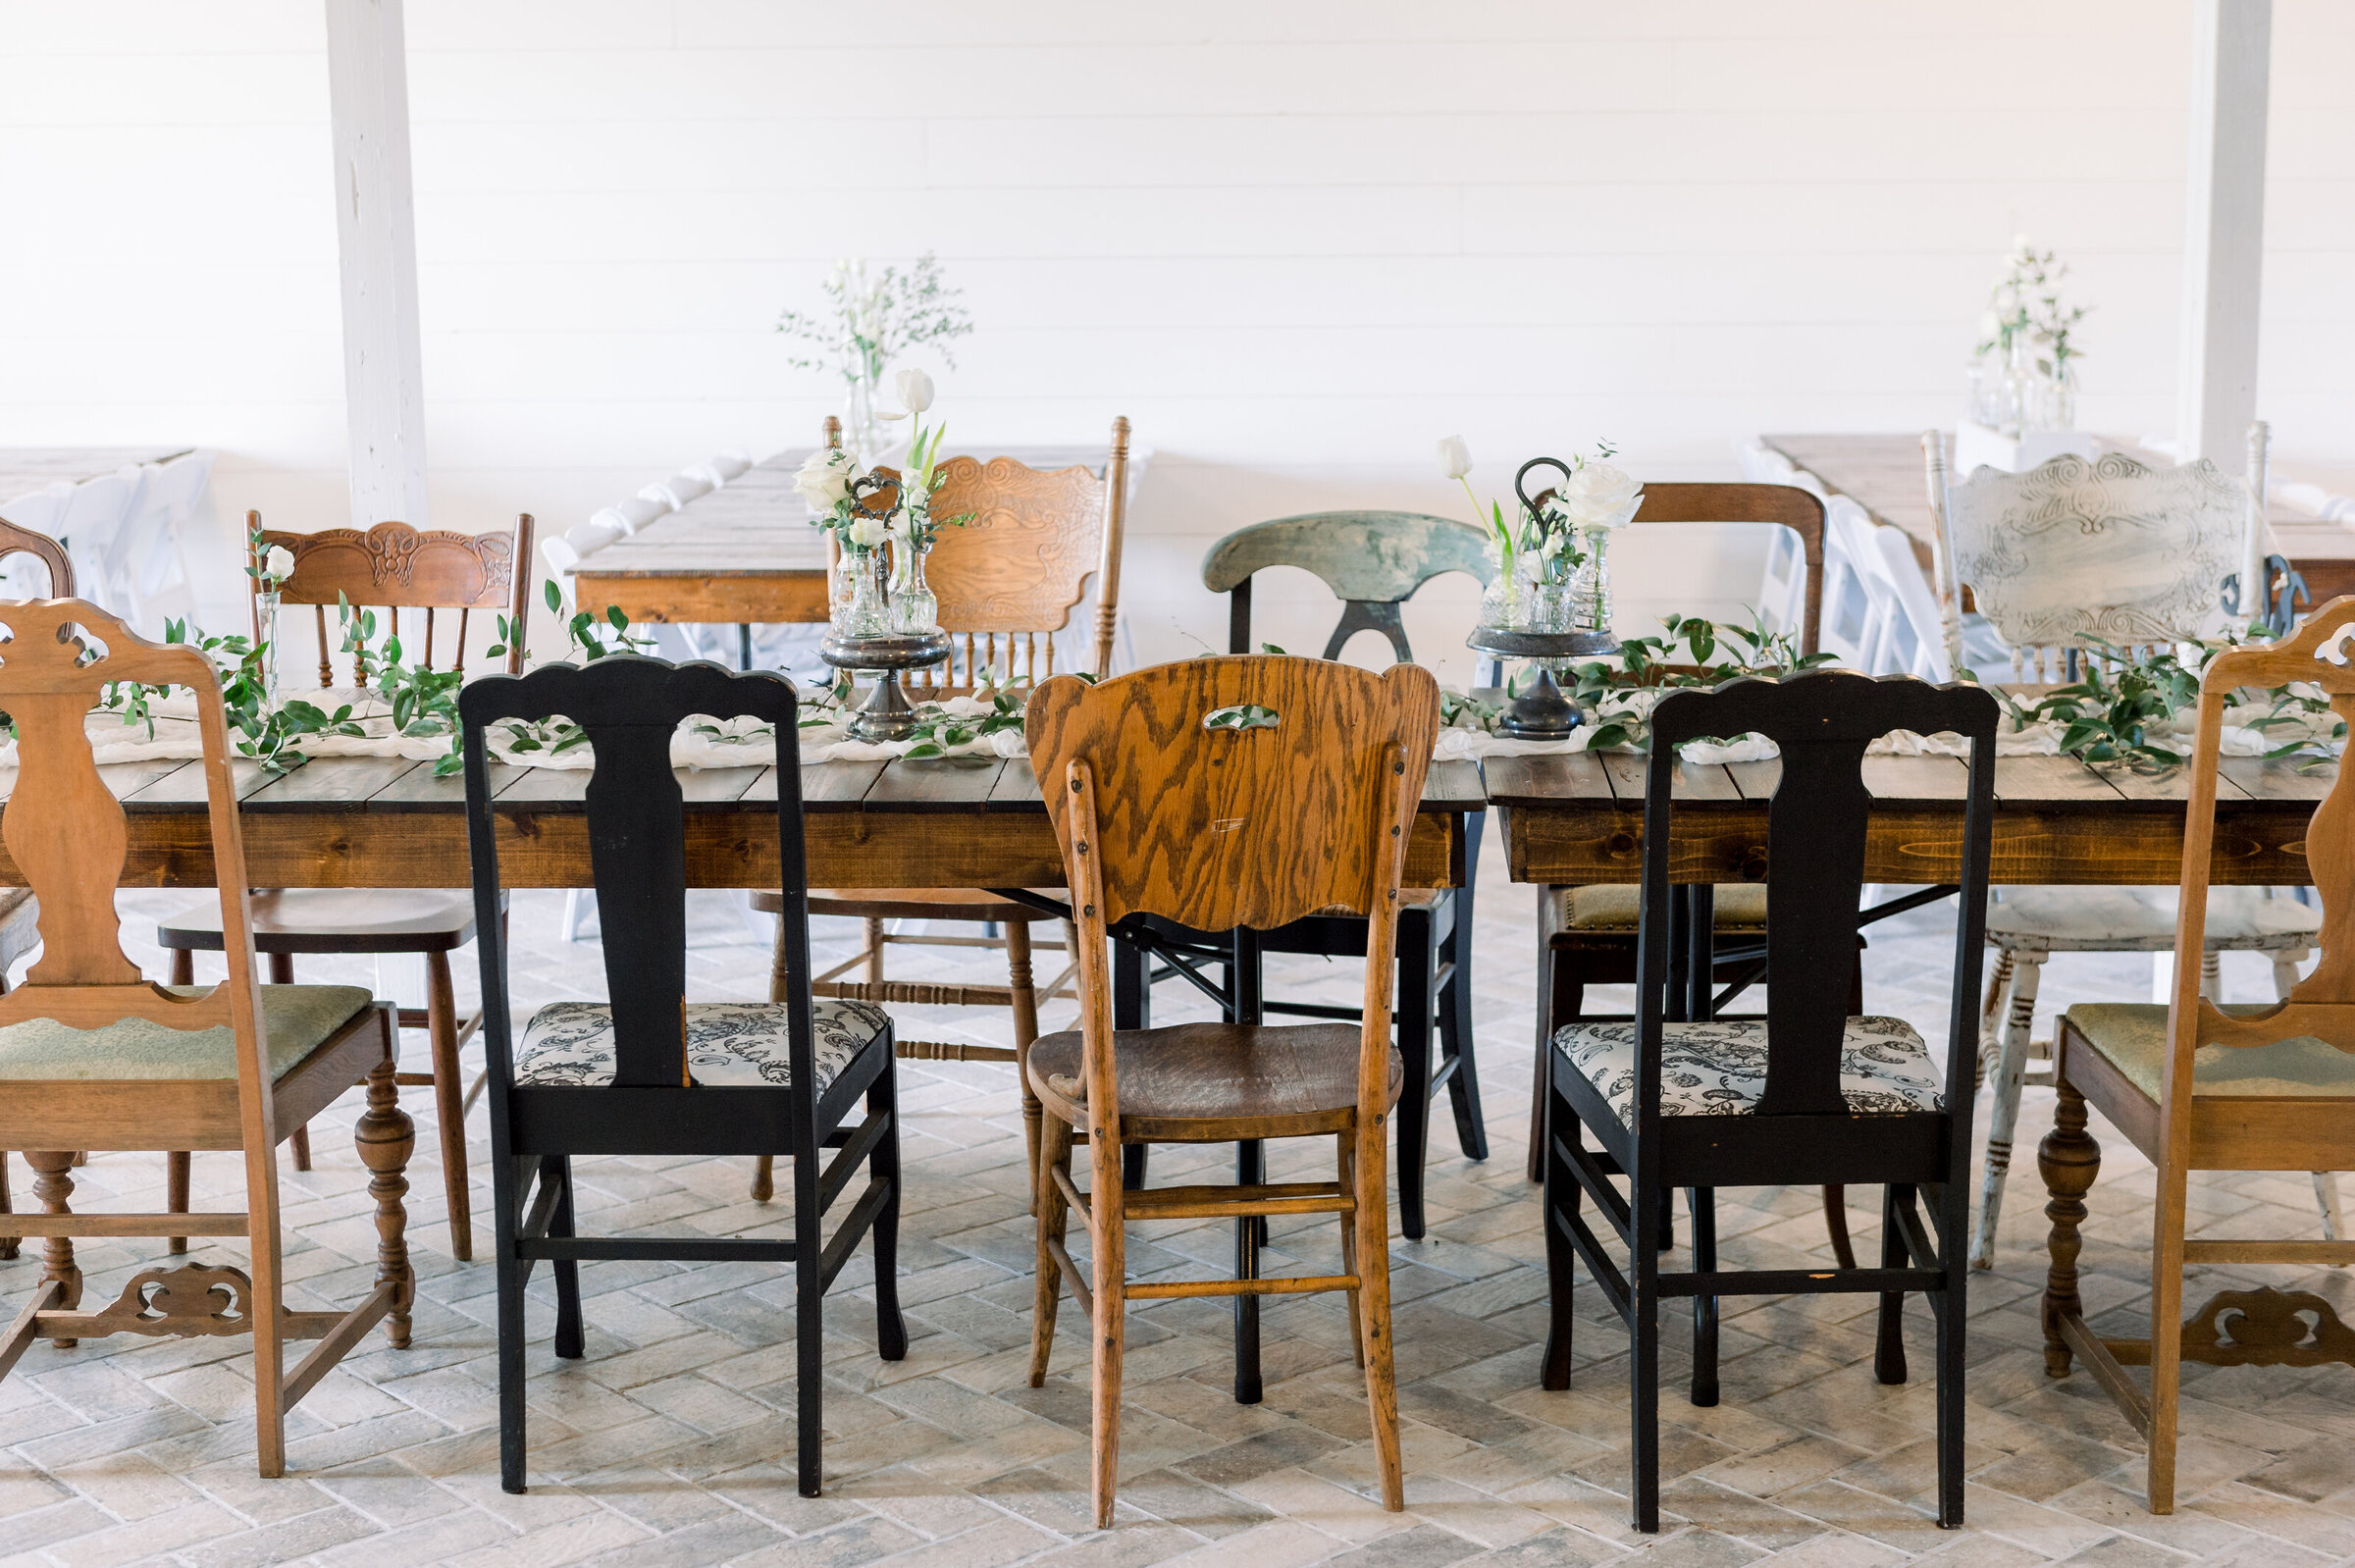 A set of vintage mismatched chairs at a wedding table